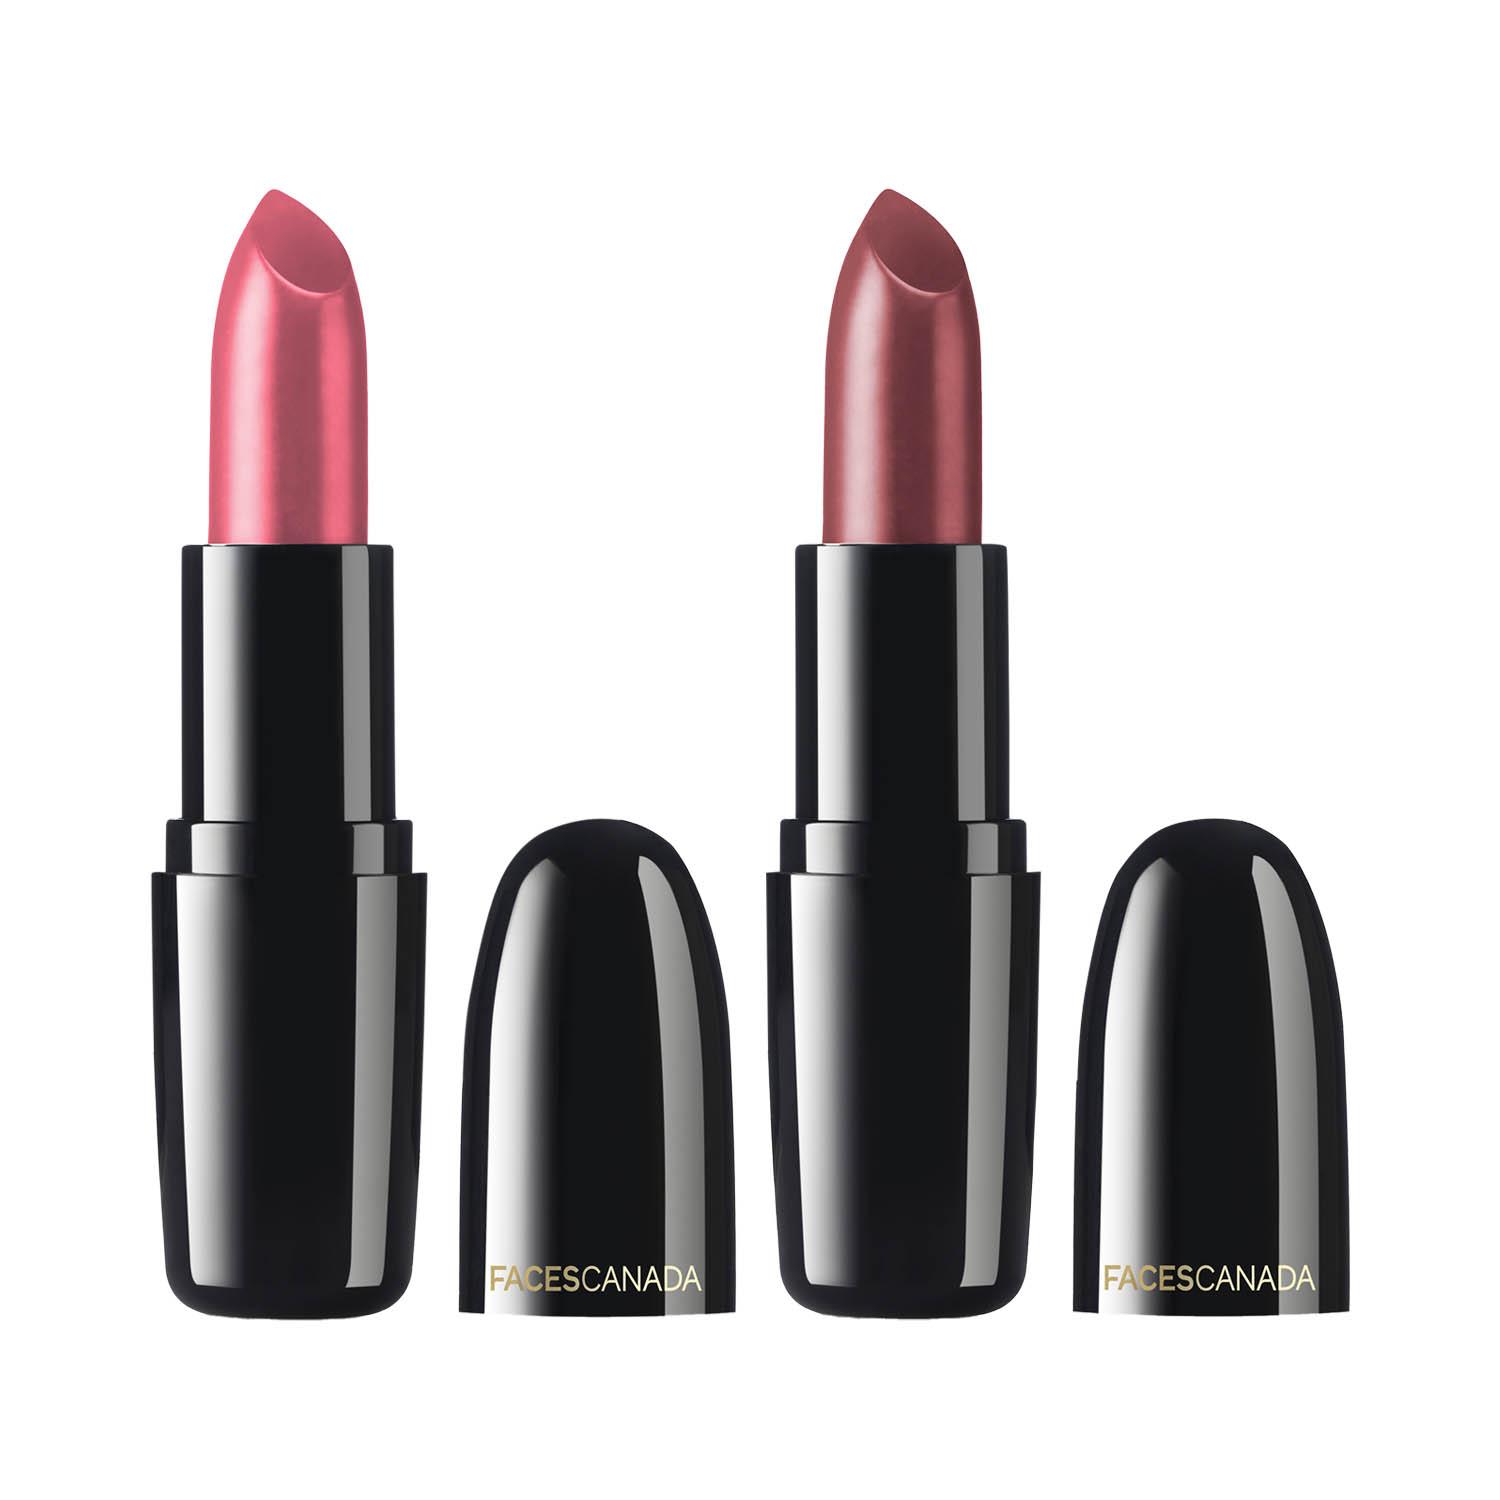 Faces Canada | Faces Canada Weightless Creme Finish Lipstick - Summer Ready and Pretty Pink (4g x 2) Combo